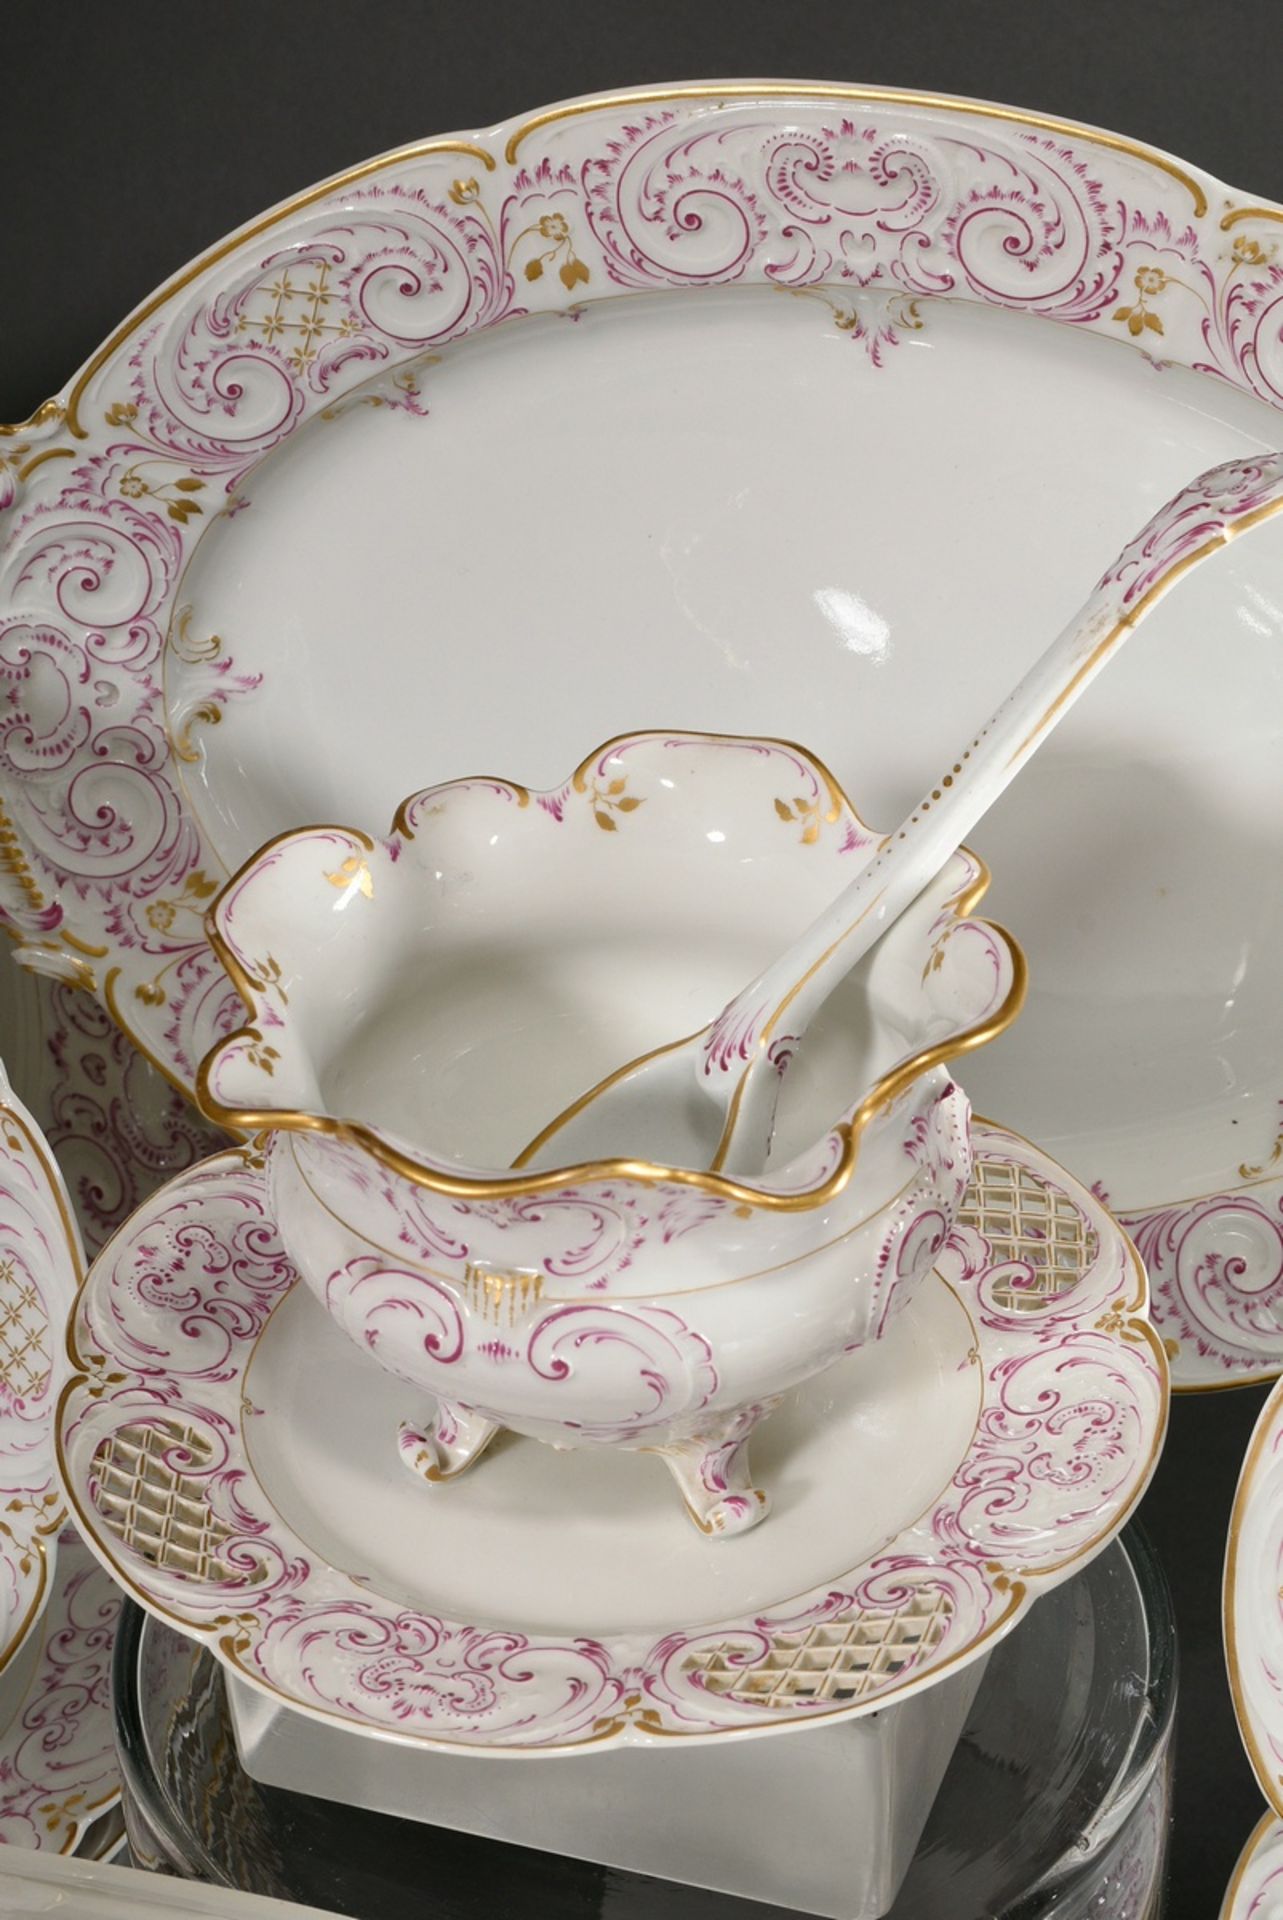 69 Pieces KPM dinner service in Rococo form with purple and gold staffage, red imperial orb mark, c - Image 7 of 22